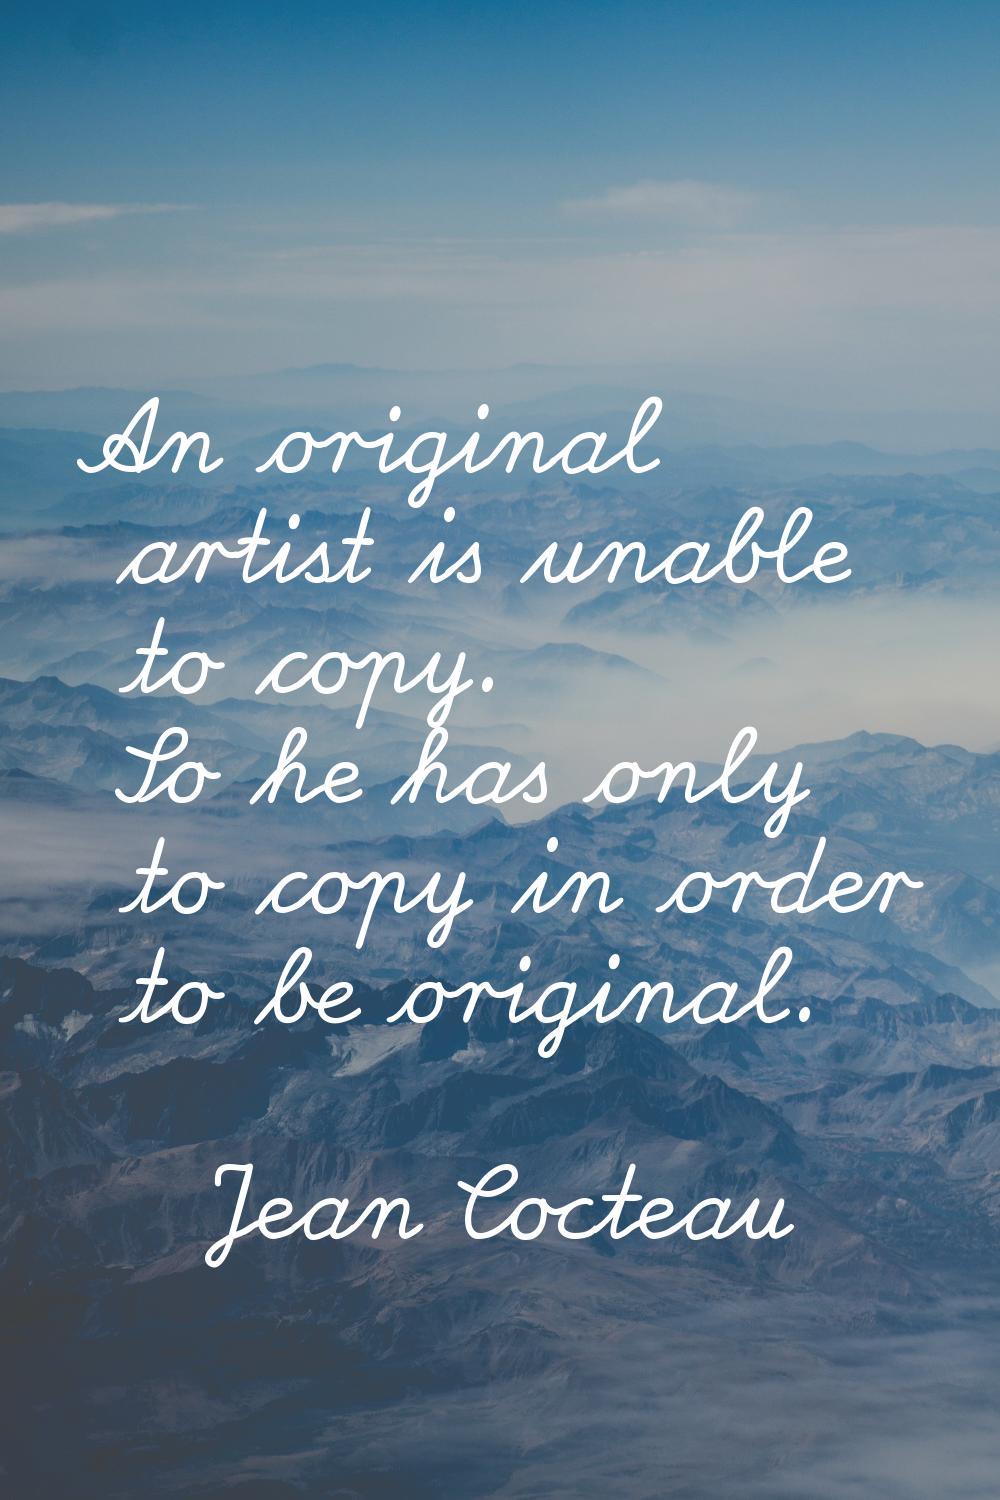 An original artist is unable to copy. So he has only to copy in order to be original.